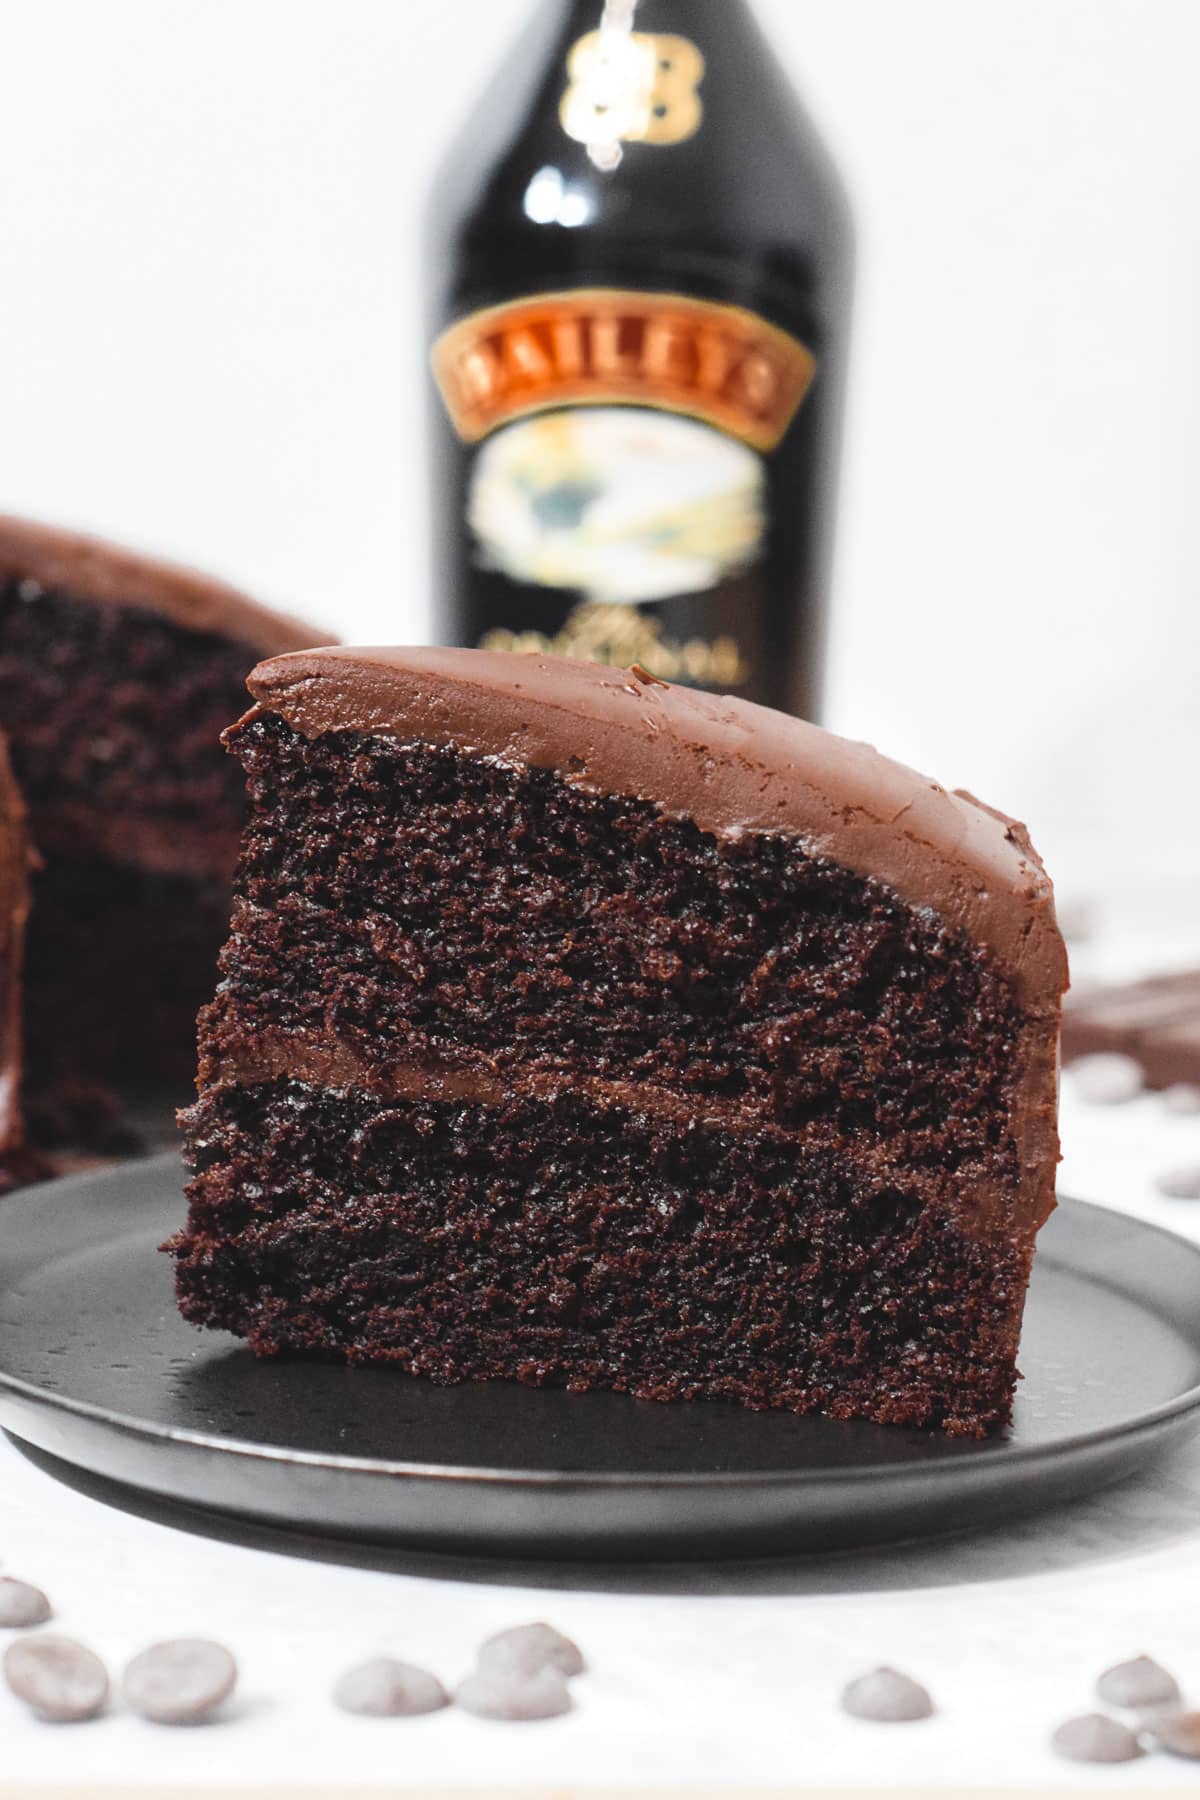 slice of baileys chocolate layer cake with baileys chocolate ganache frosting and filling.